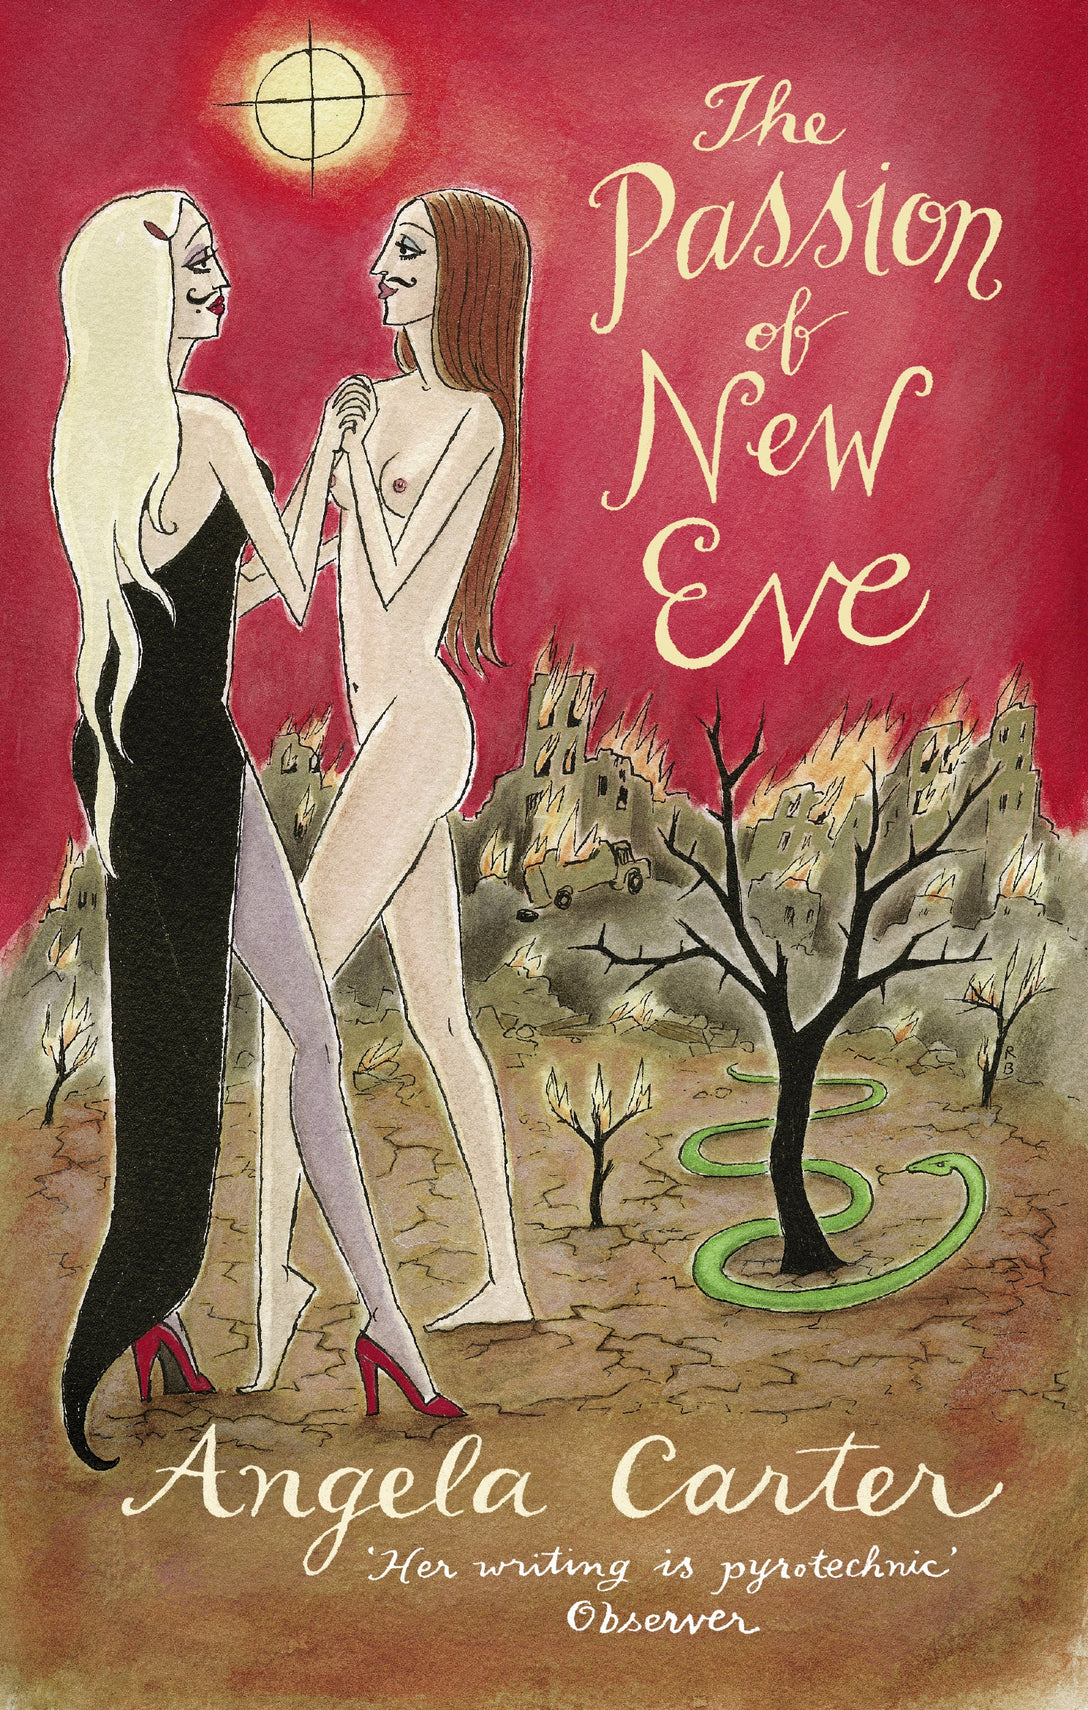 The Passion Of New Eve by Angela Carter